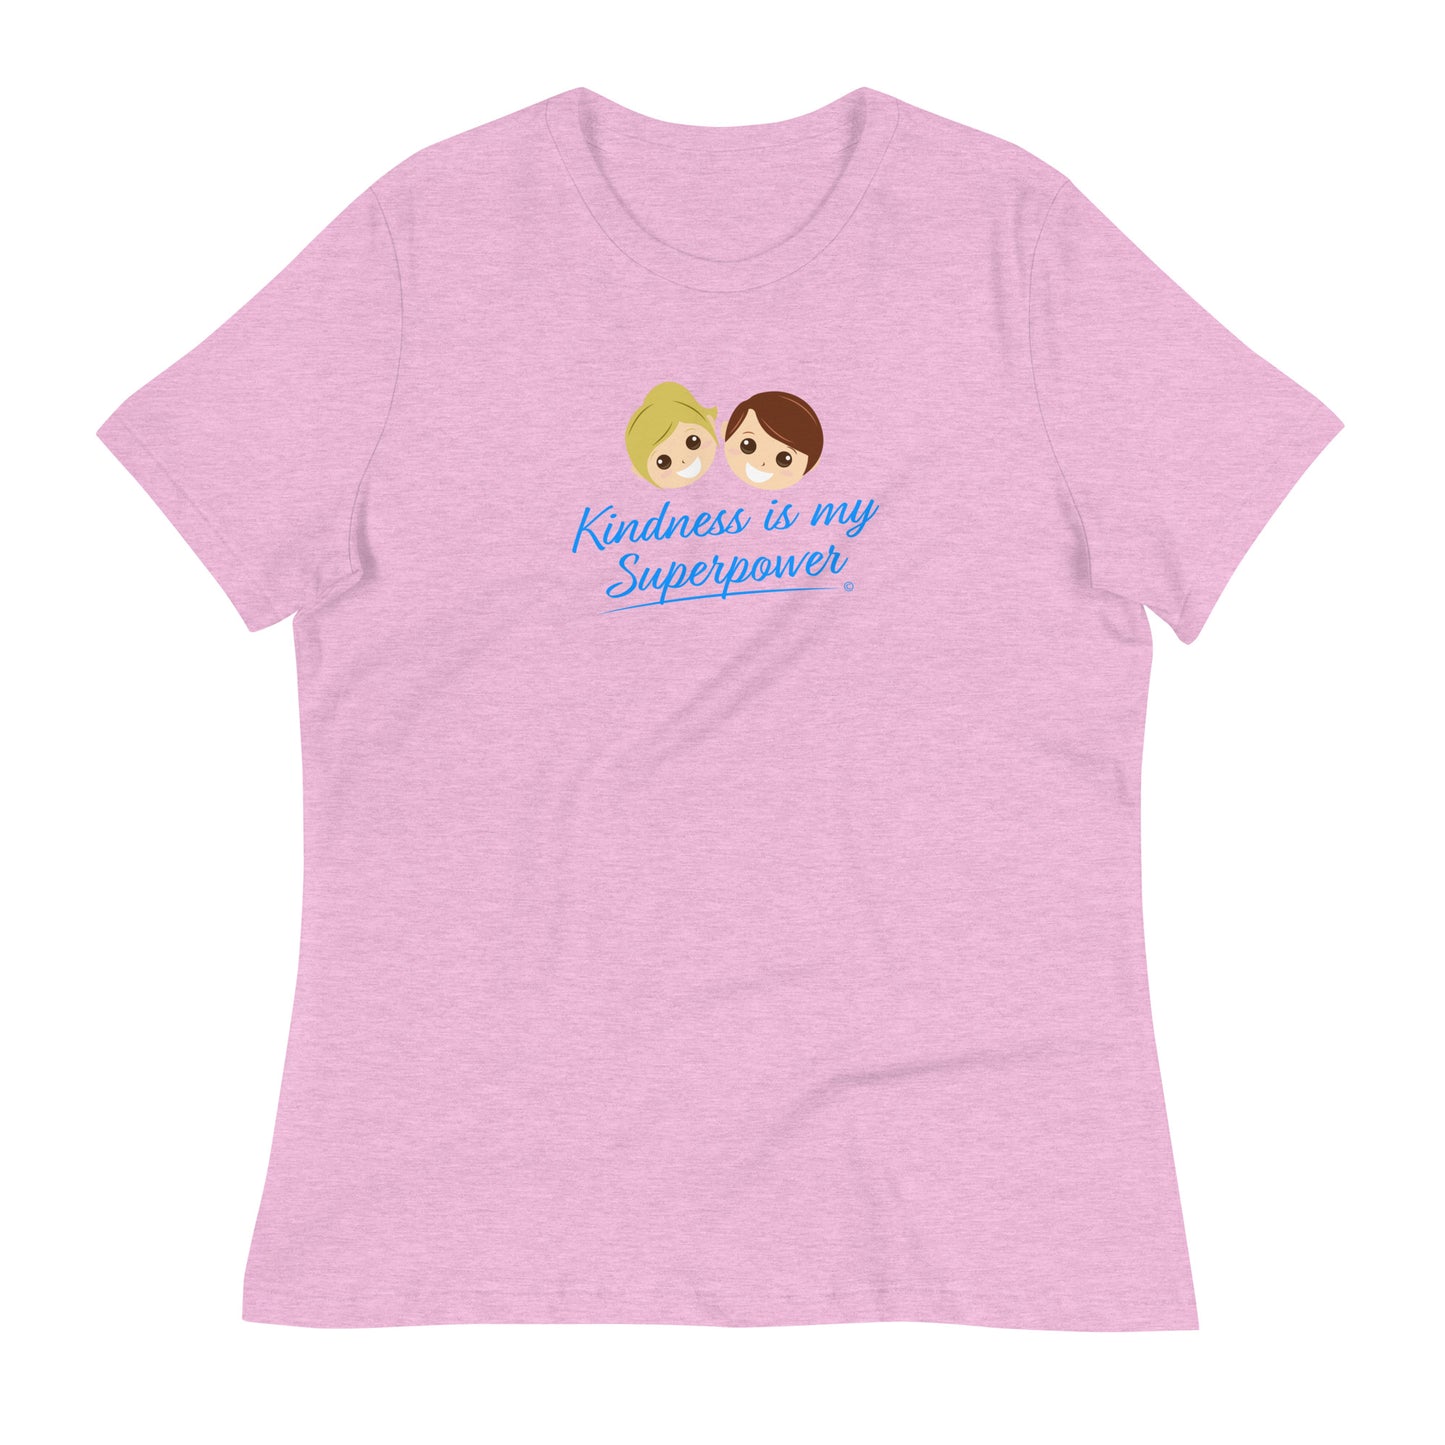 Heather prism lilac color shirt featuring the empowering quote 'Kindness is my Superpower' in bold lettering.